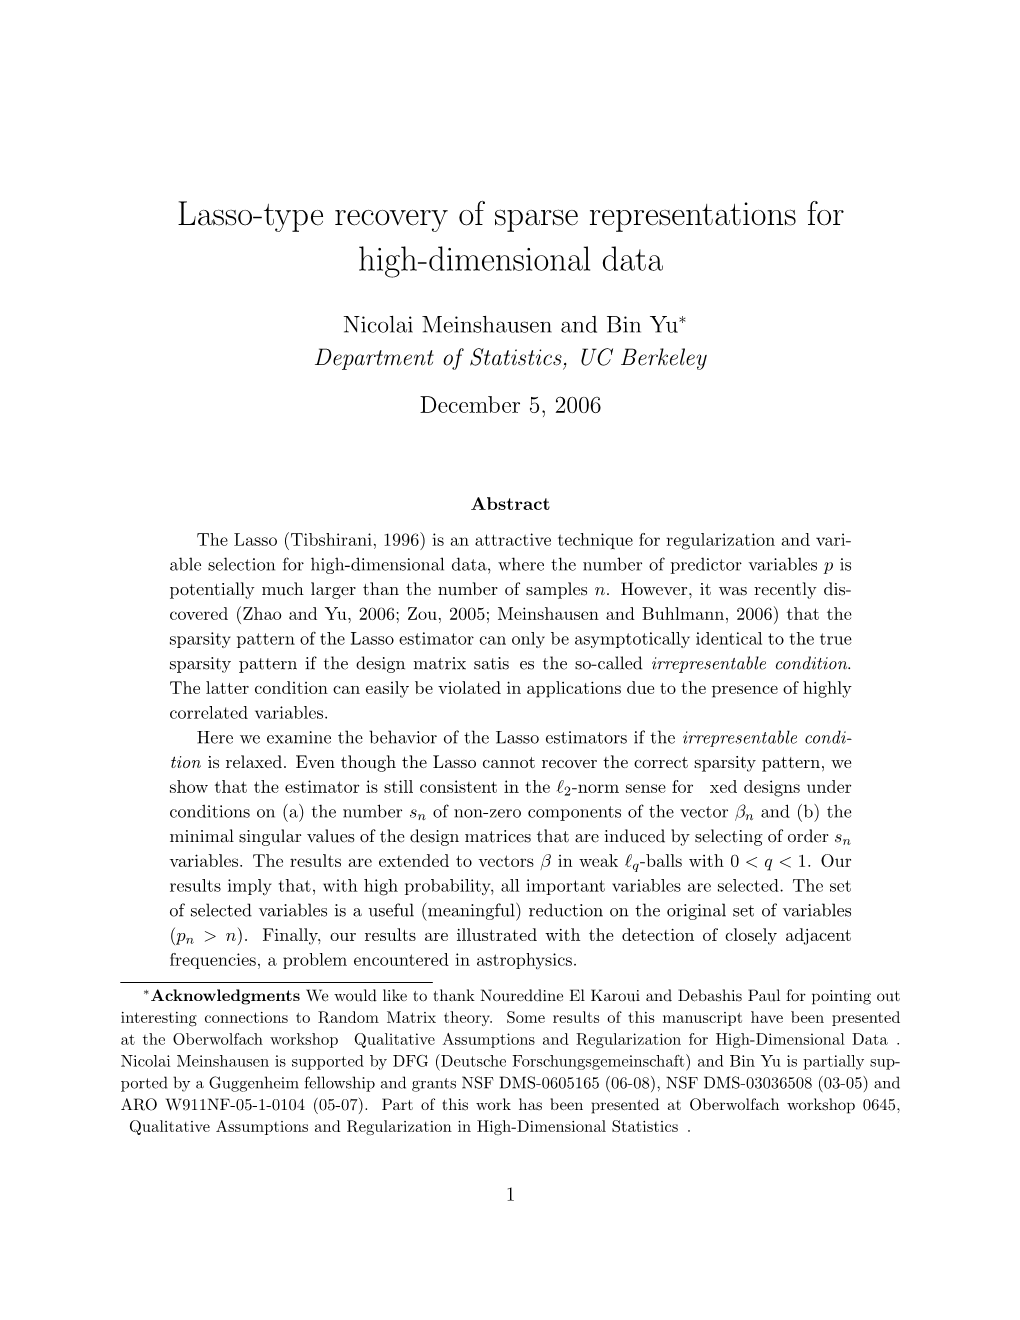 Lasso-Type Recovery of Sparse Representations for High-Dimensional Data